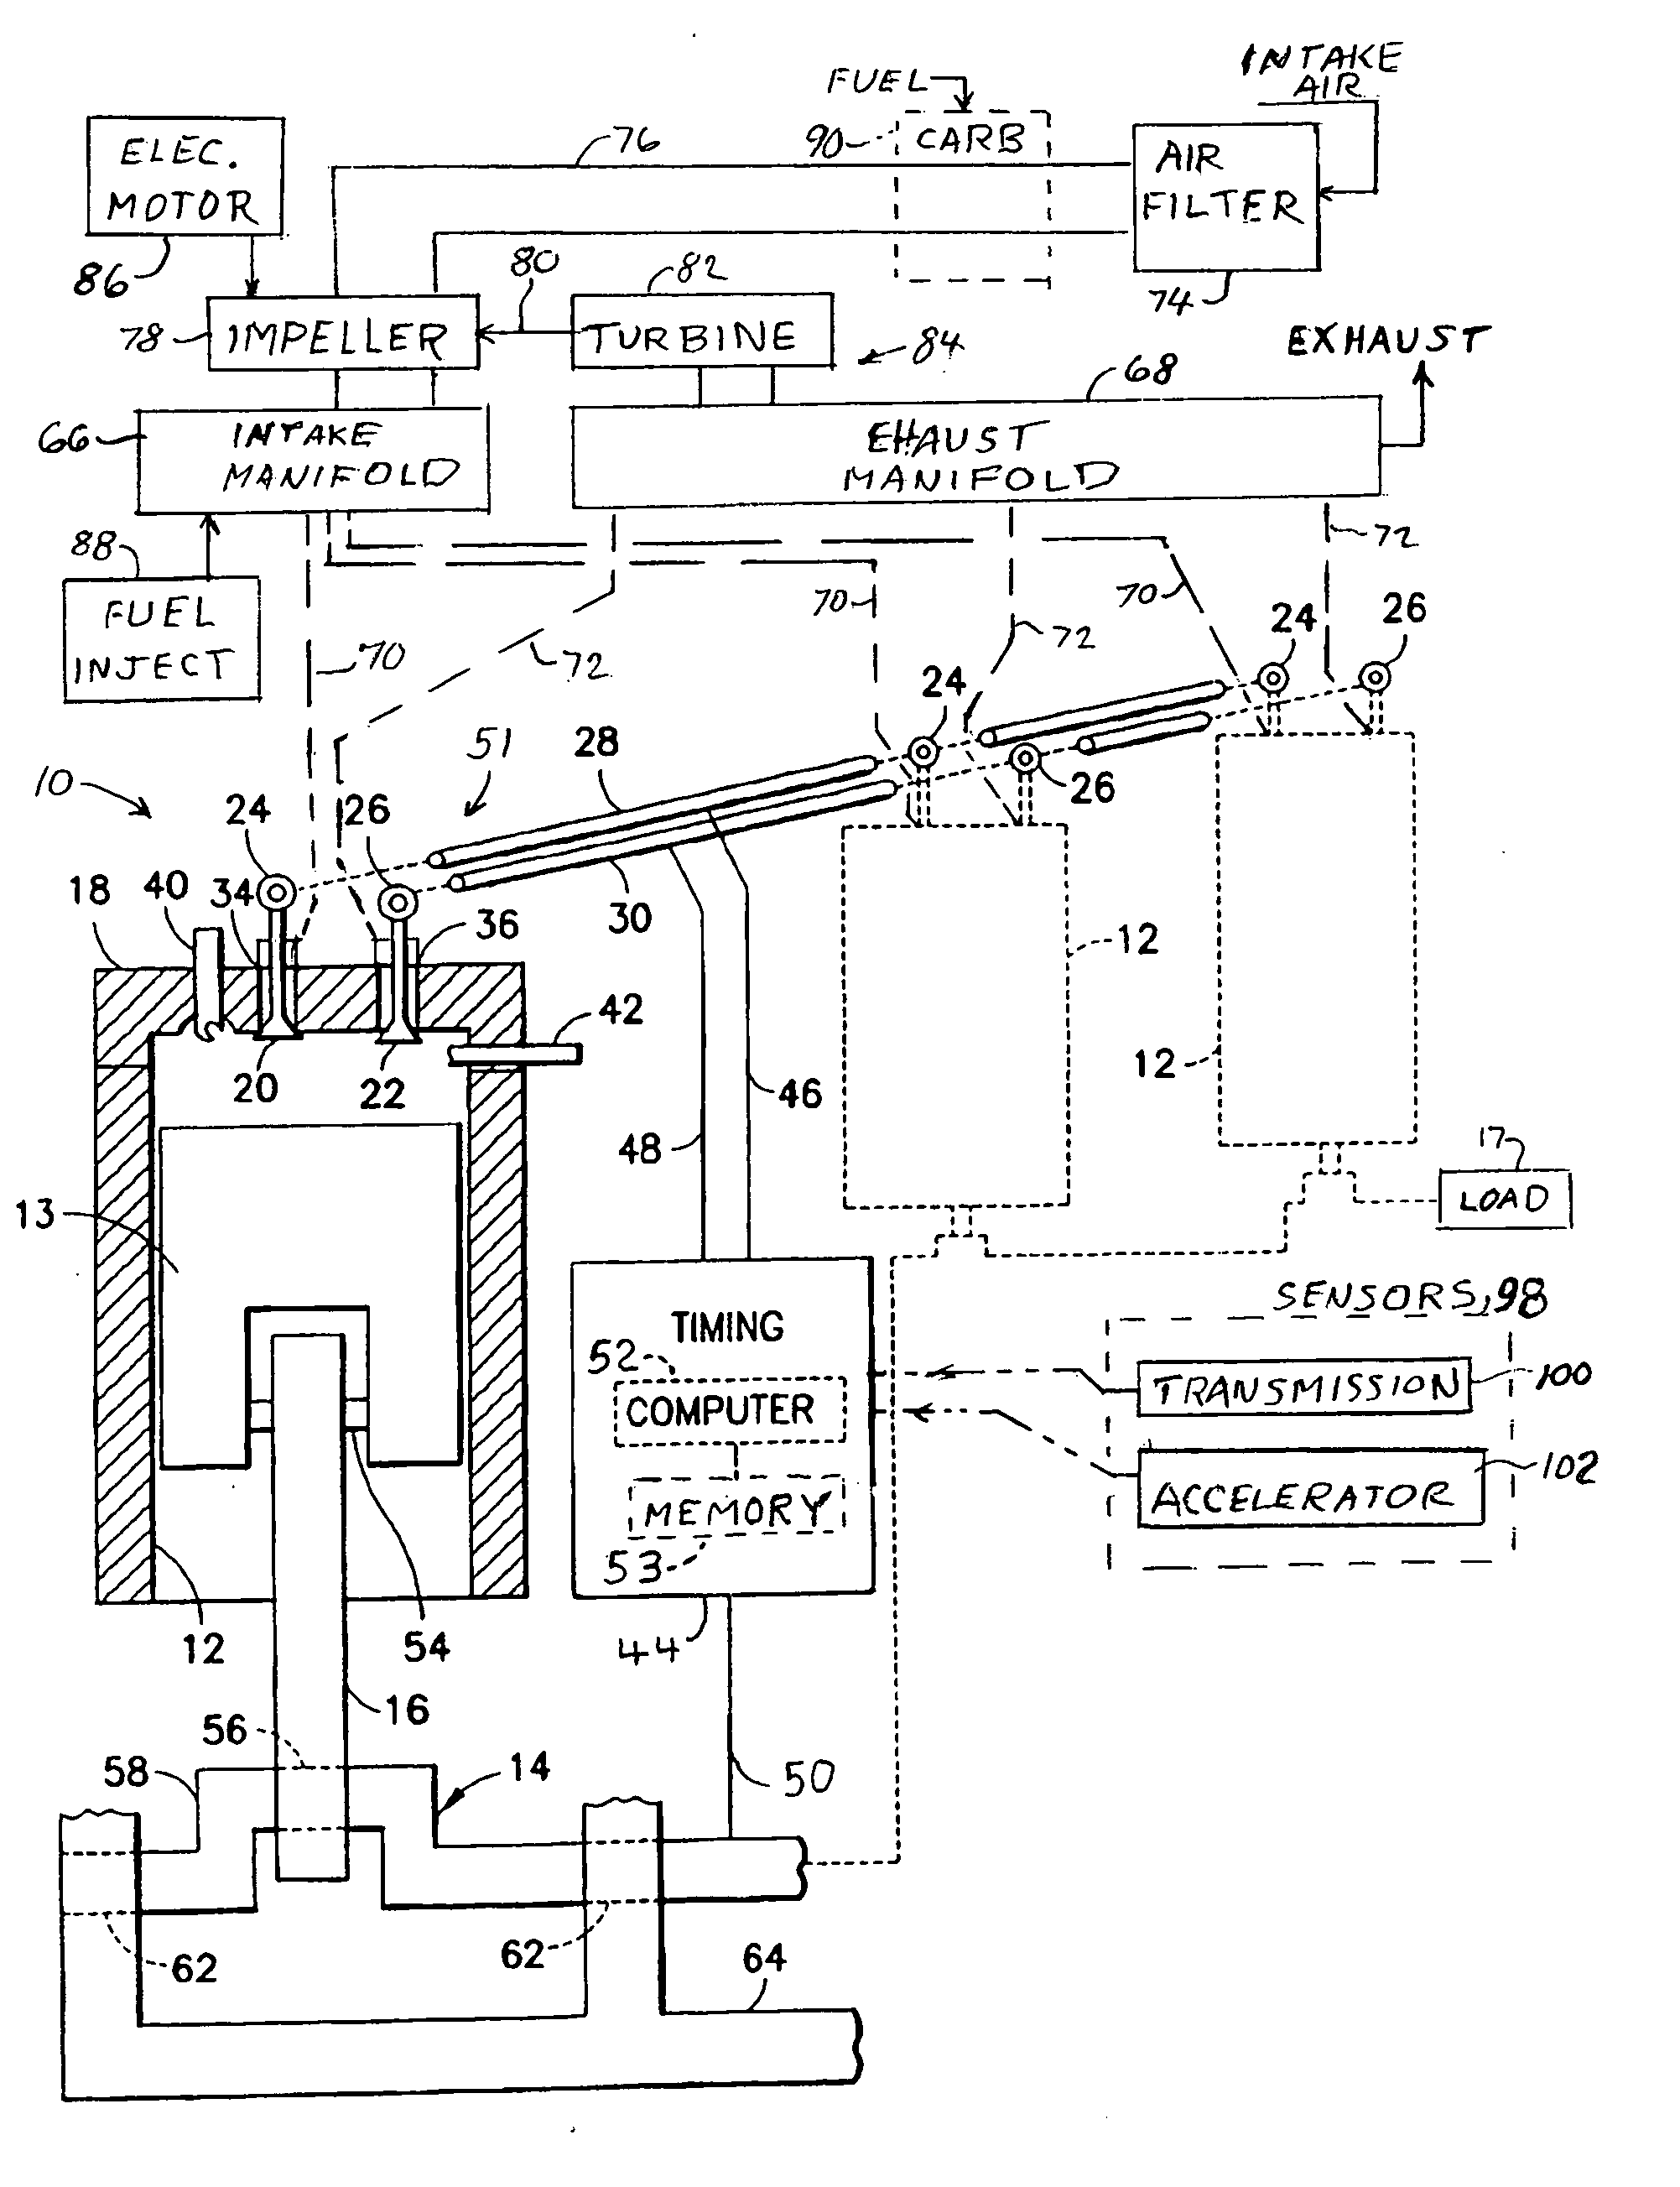 Two-stroke internal combustion engine with valves for improved fuel efficiency